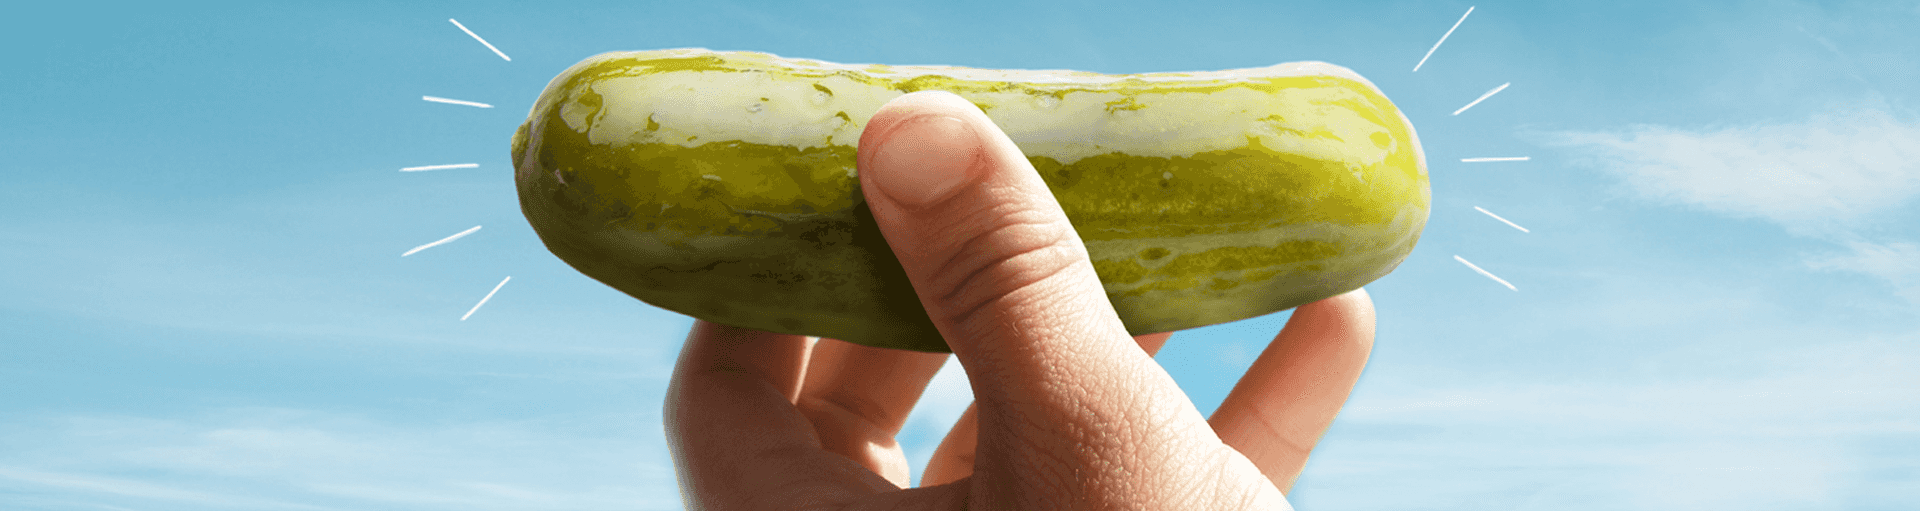 A hand holding a pickle